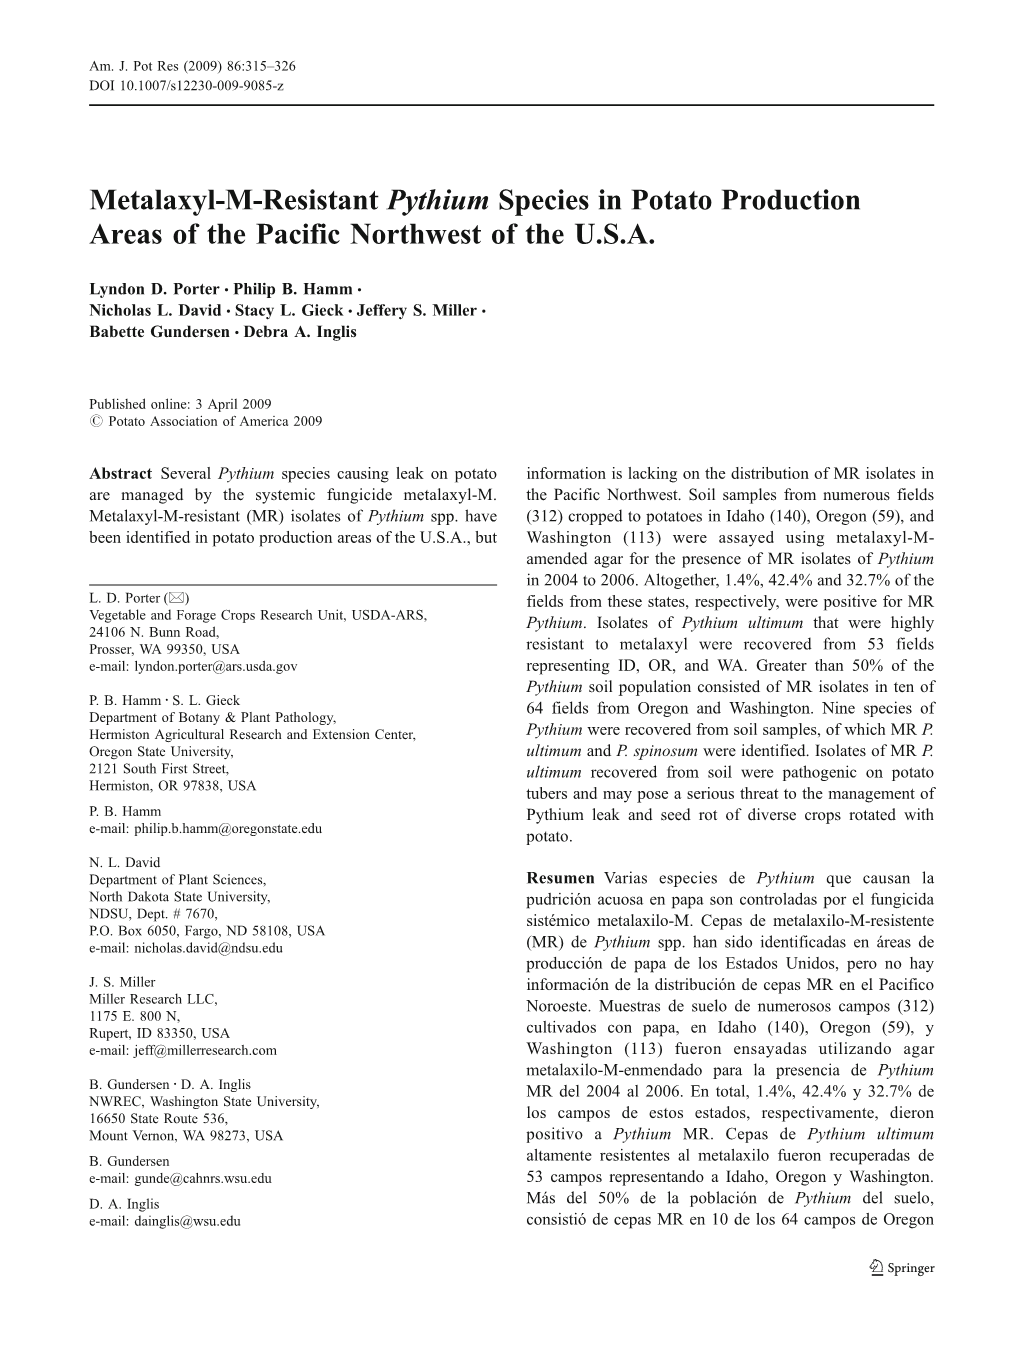 Metalaxyl-M-Resistant Pythium Species in Potato Production Areas of the Pacific Northwest of the U.S.A